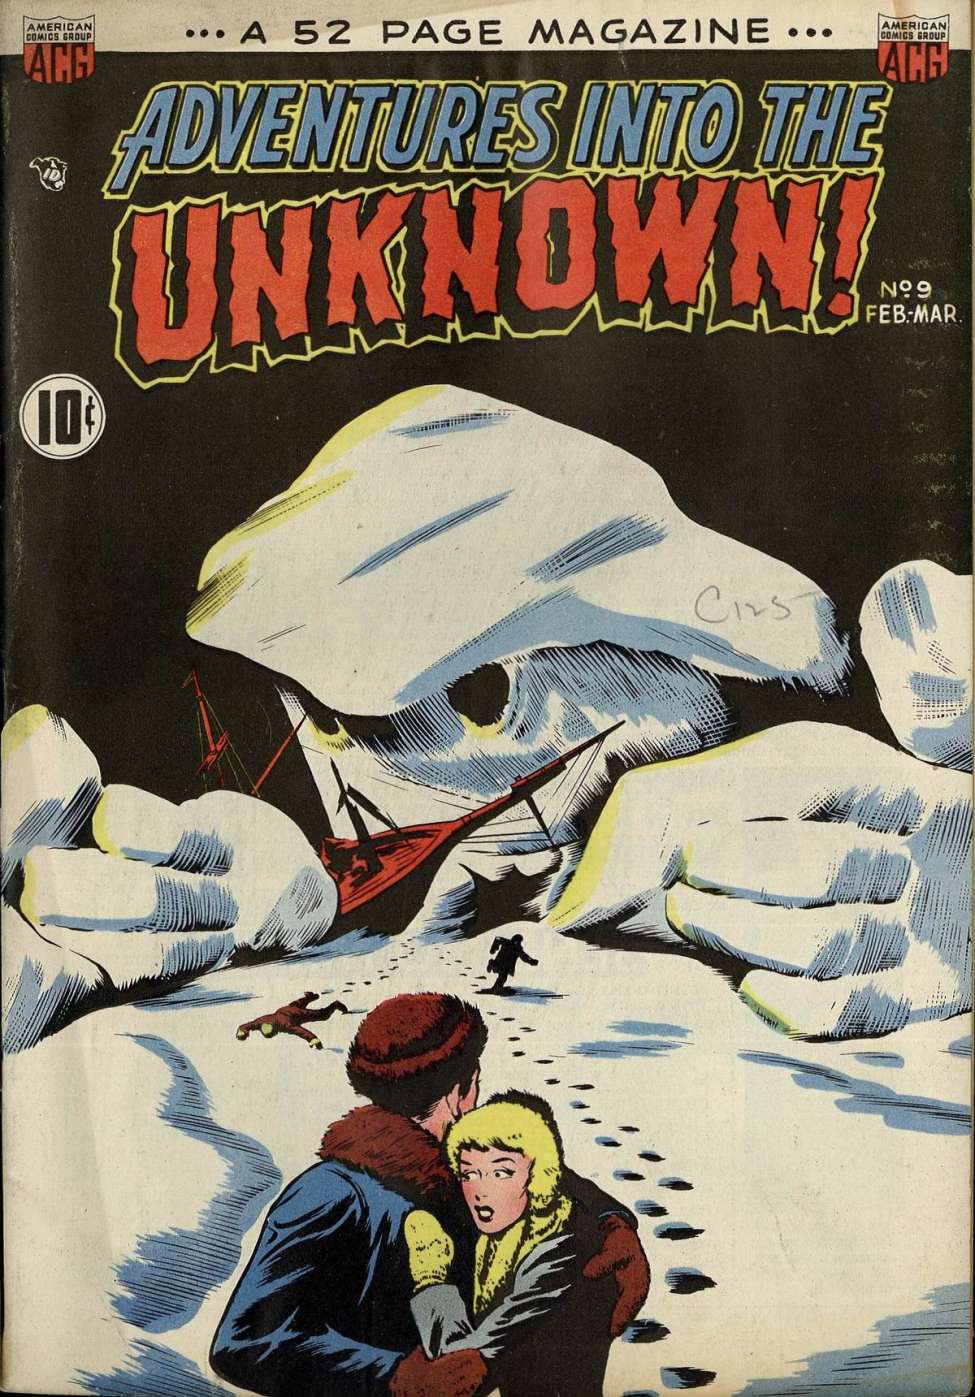 Comic Book Cover For Adventures into the Unknown 9